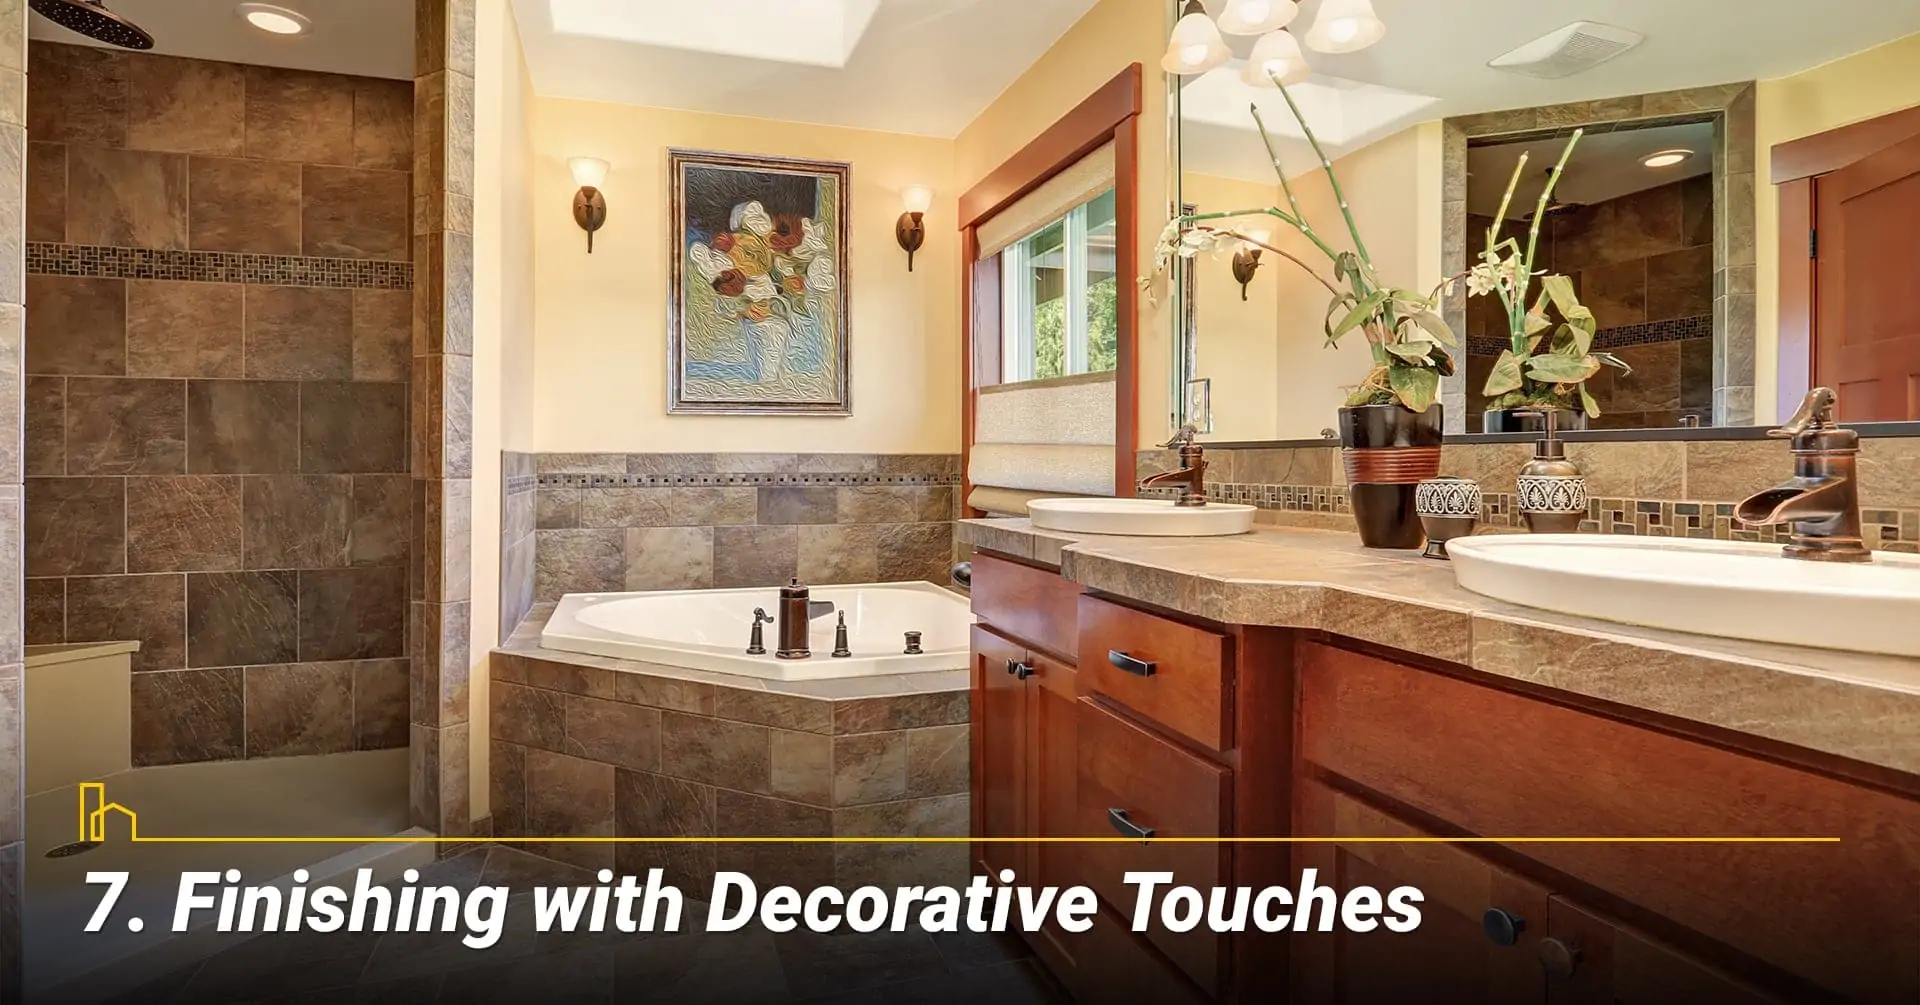 Finishing with Decorative Touches, add decorative items